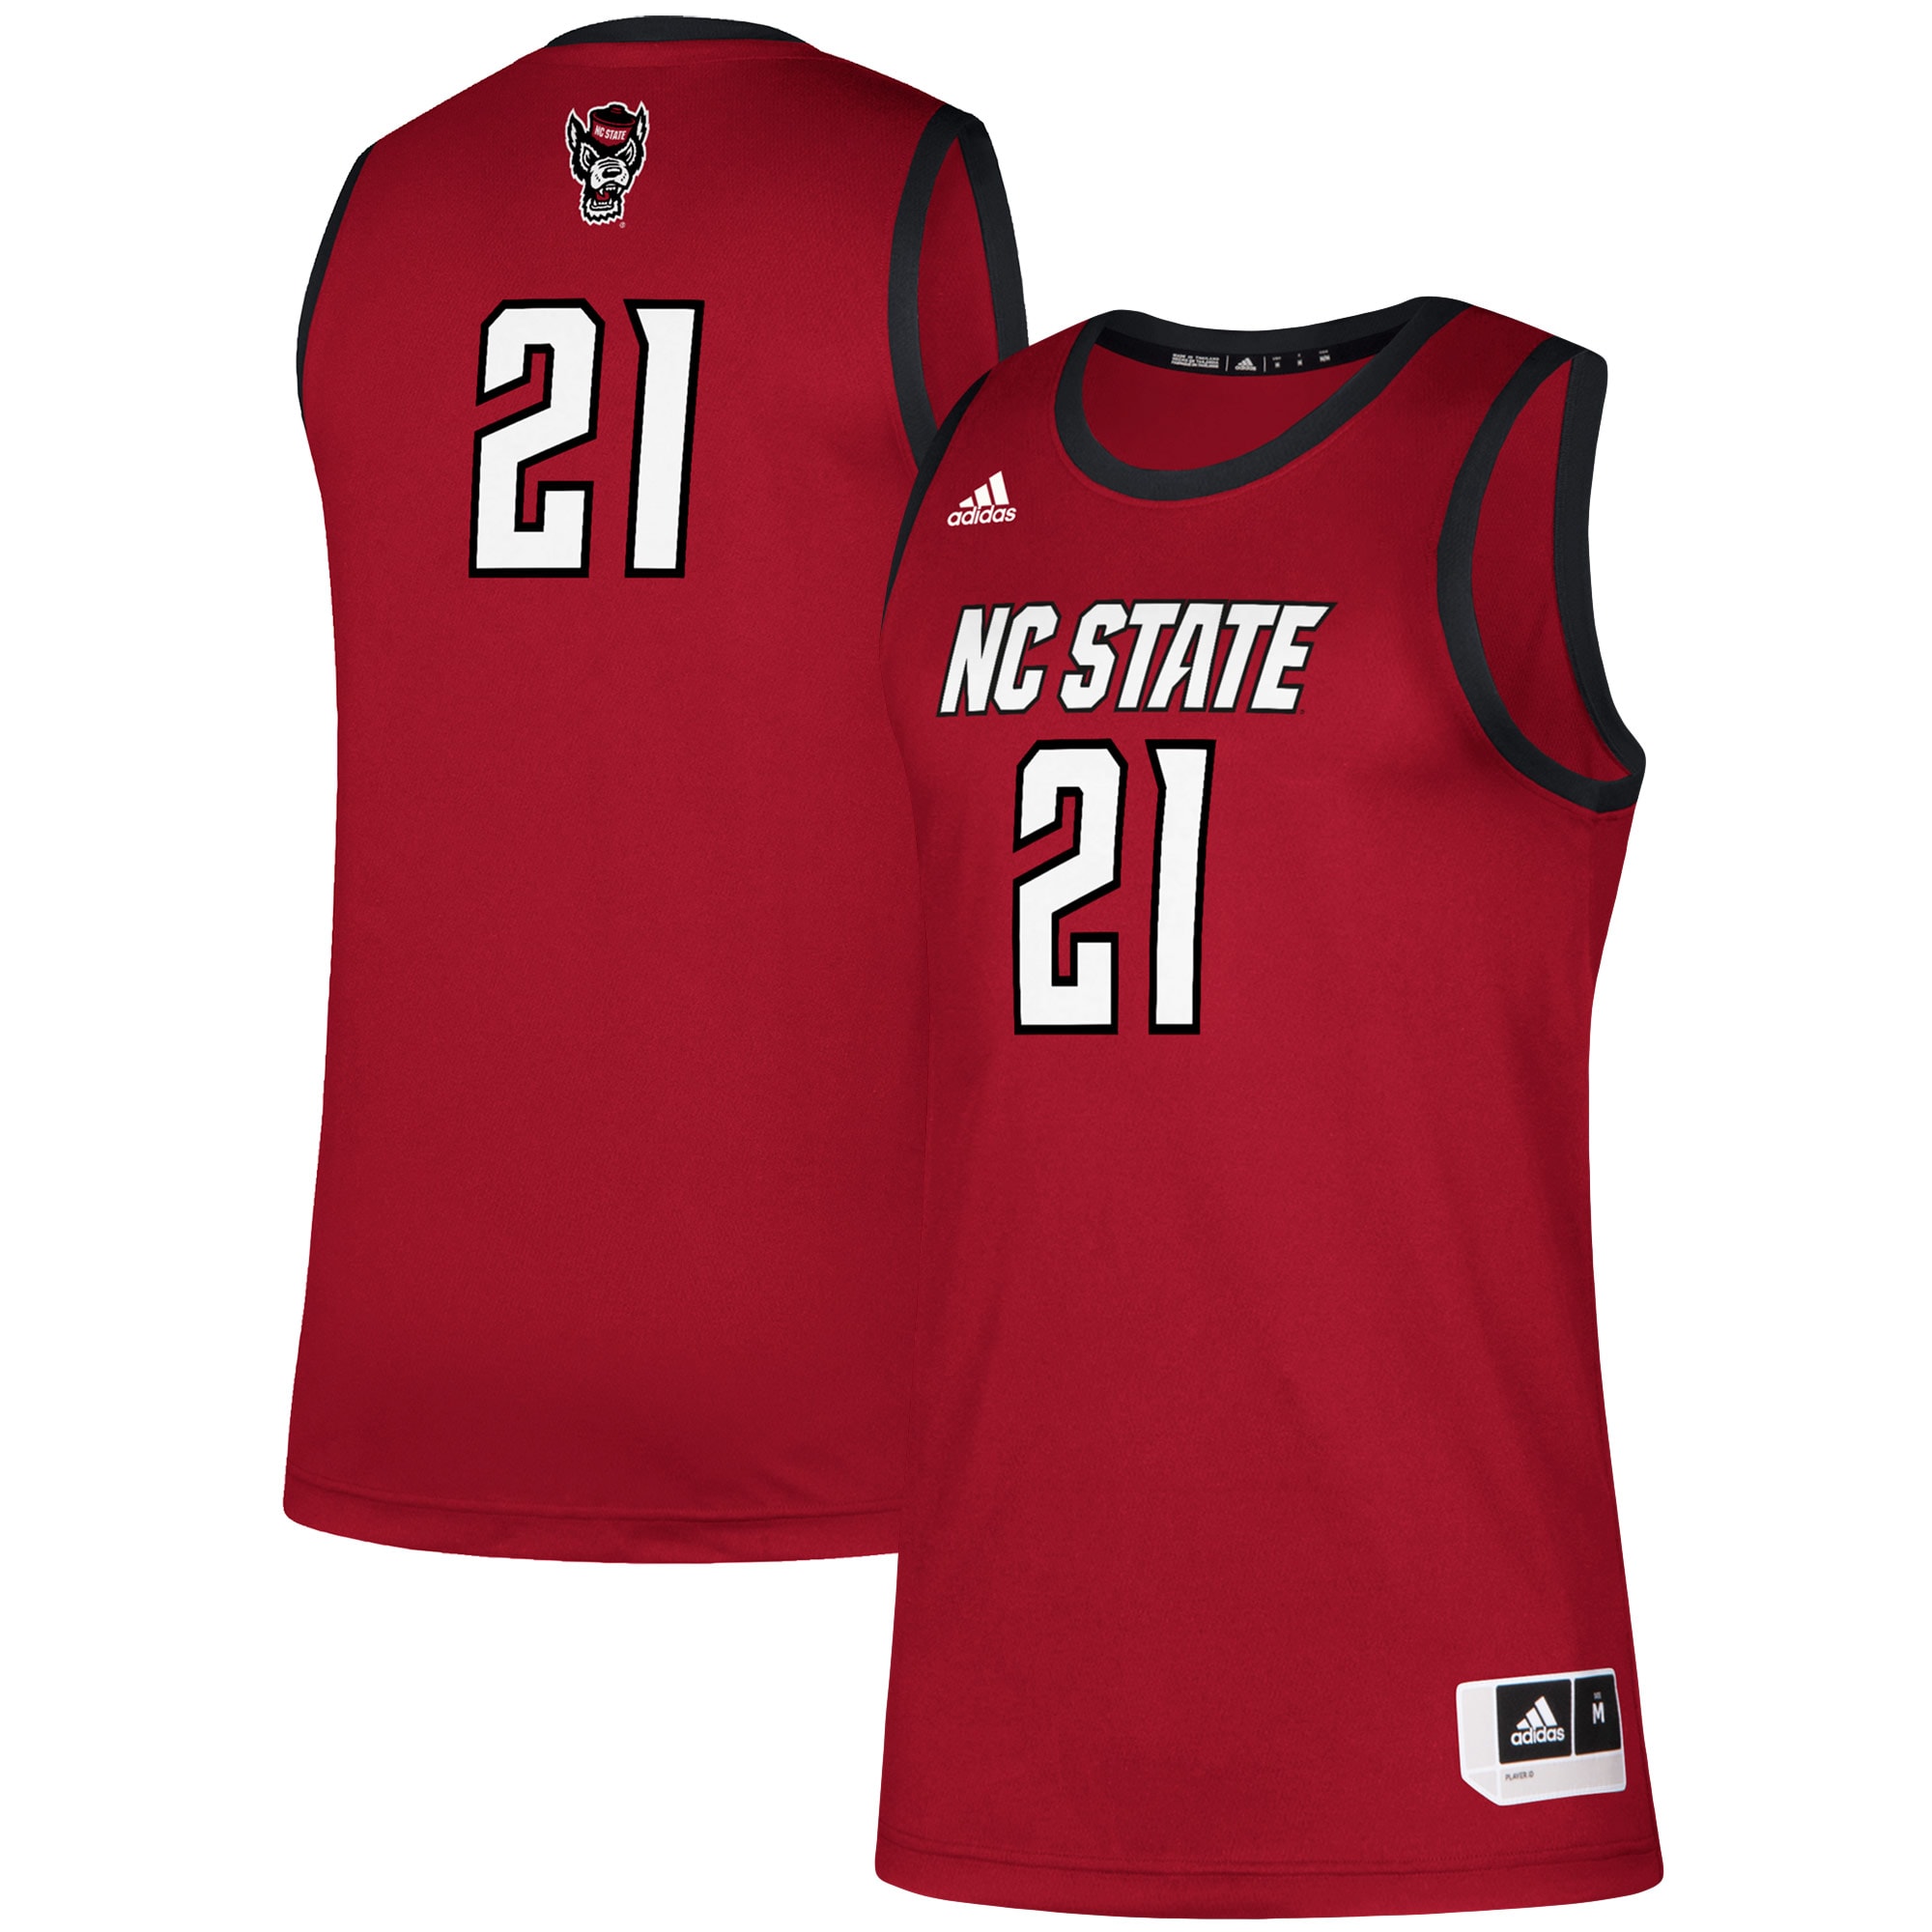 #21 Nc State Wolfpack   Swingman Jersey - Red For Youth Women Men